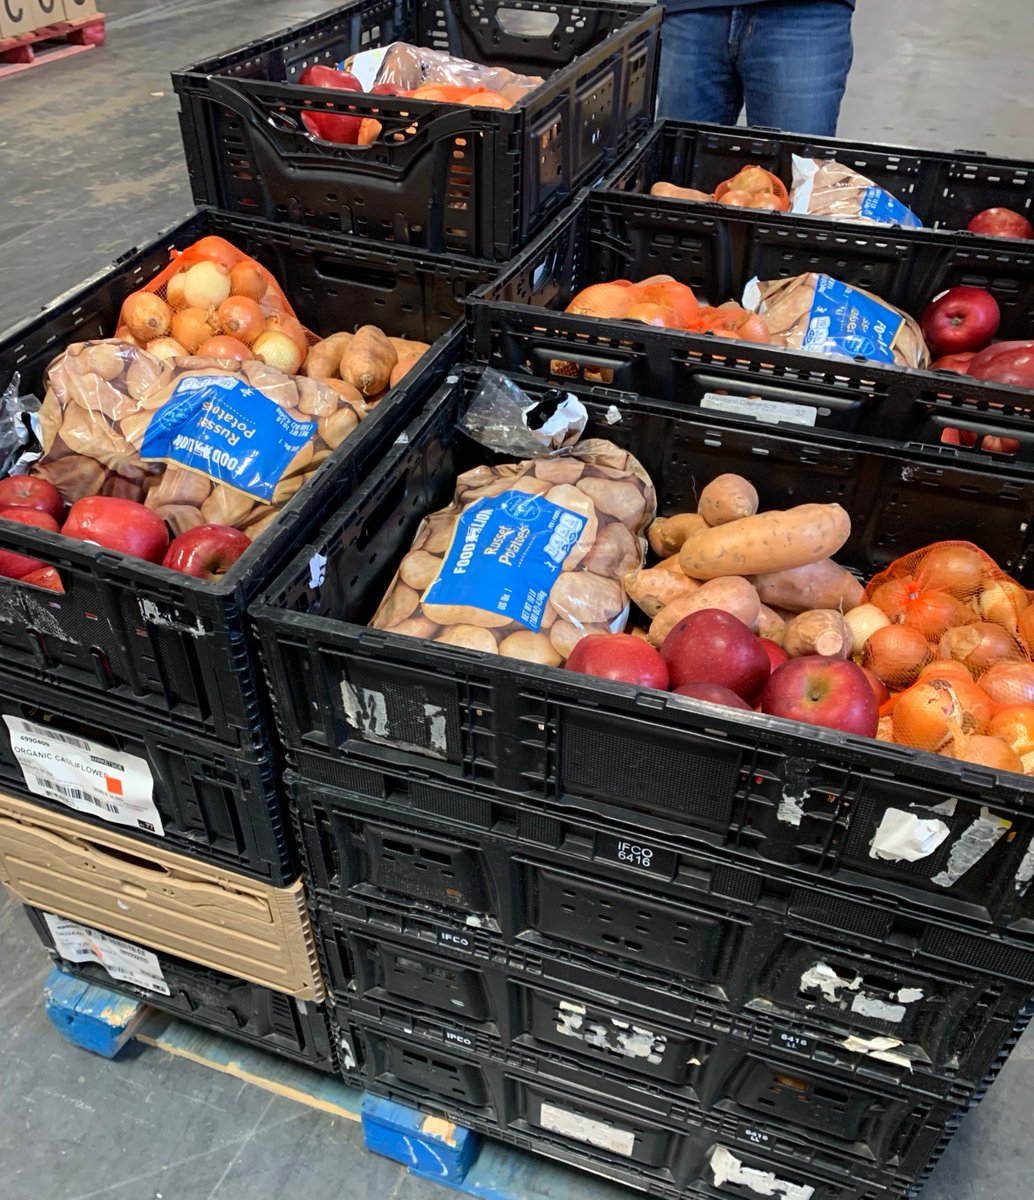 Our team had a fulfilling afternoon at Harvesters last Friday, packing baskets full of fresh fruits and vegetables for Thanksgiving meals. Wishing everyone a joy-filled Thanksgiving! 🍂🦃